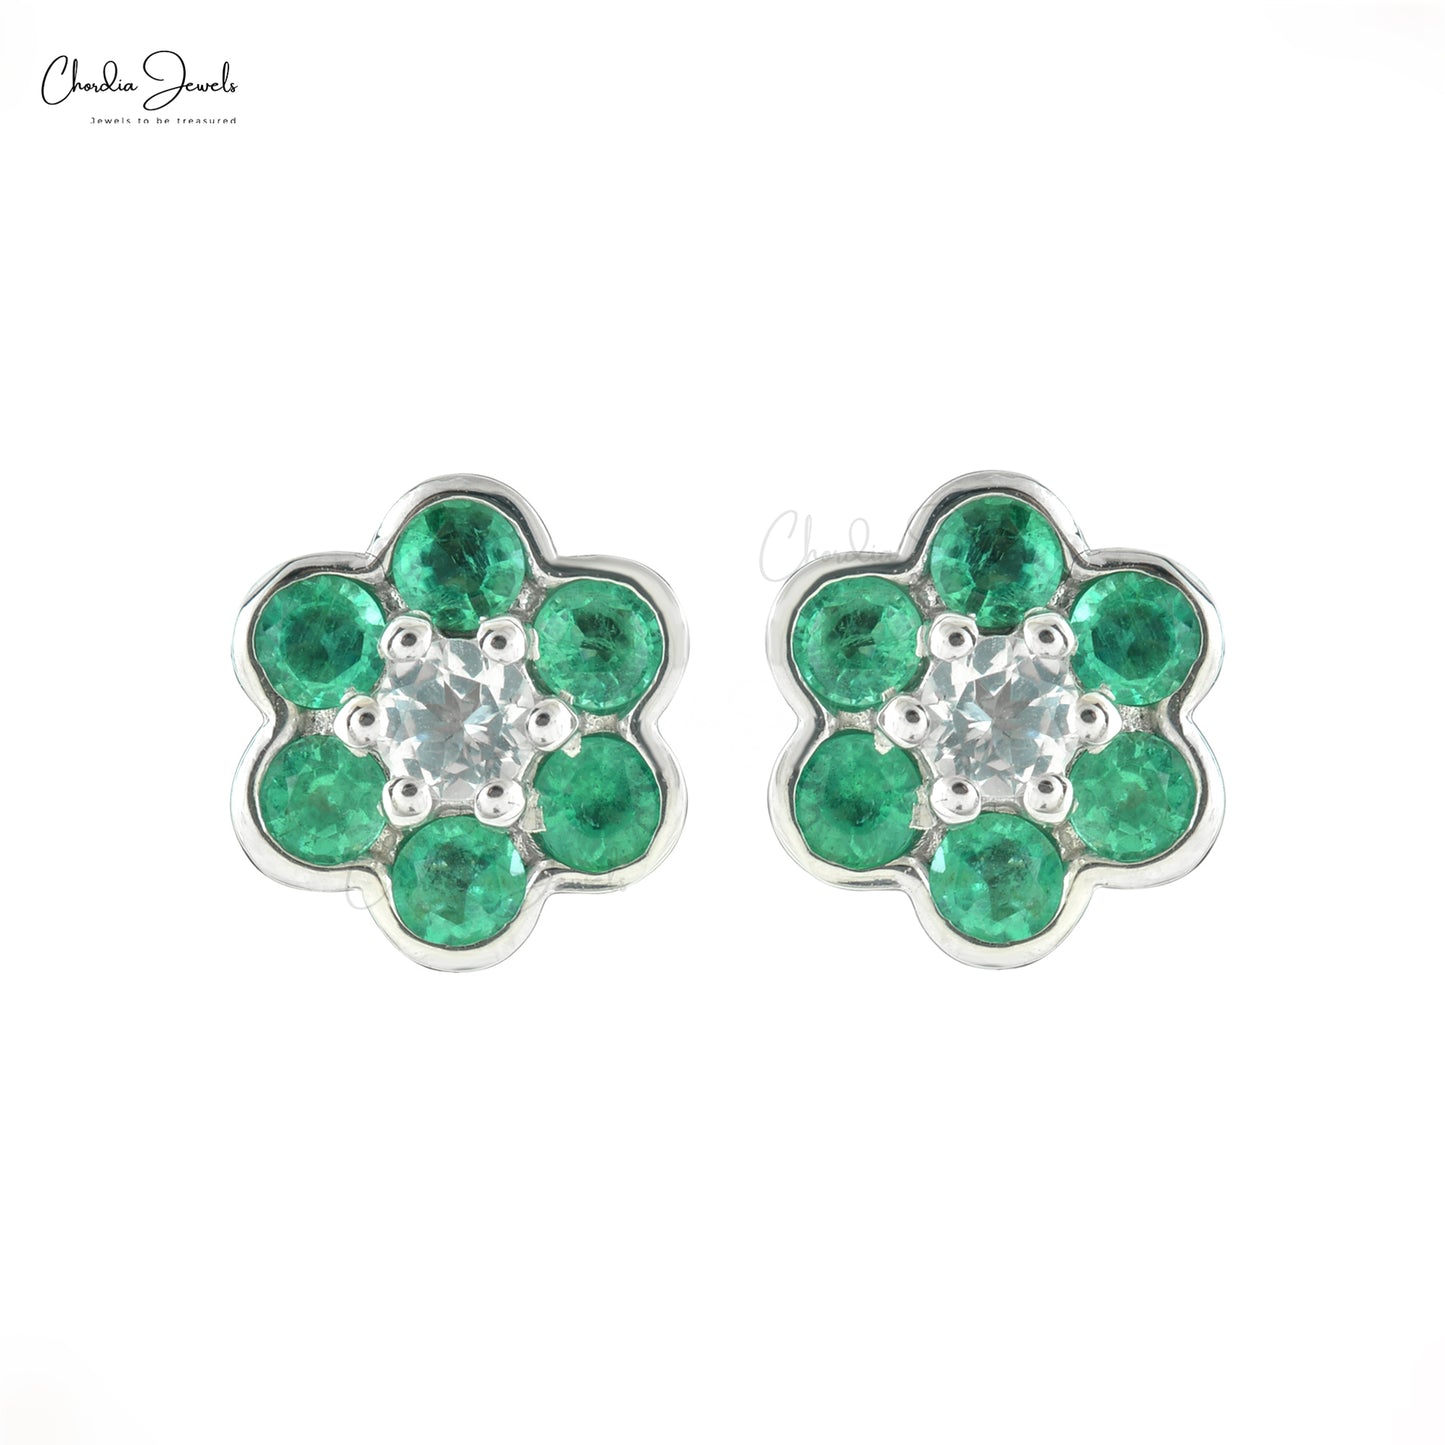 Transform your style with these prong set emerald earrings.